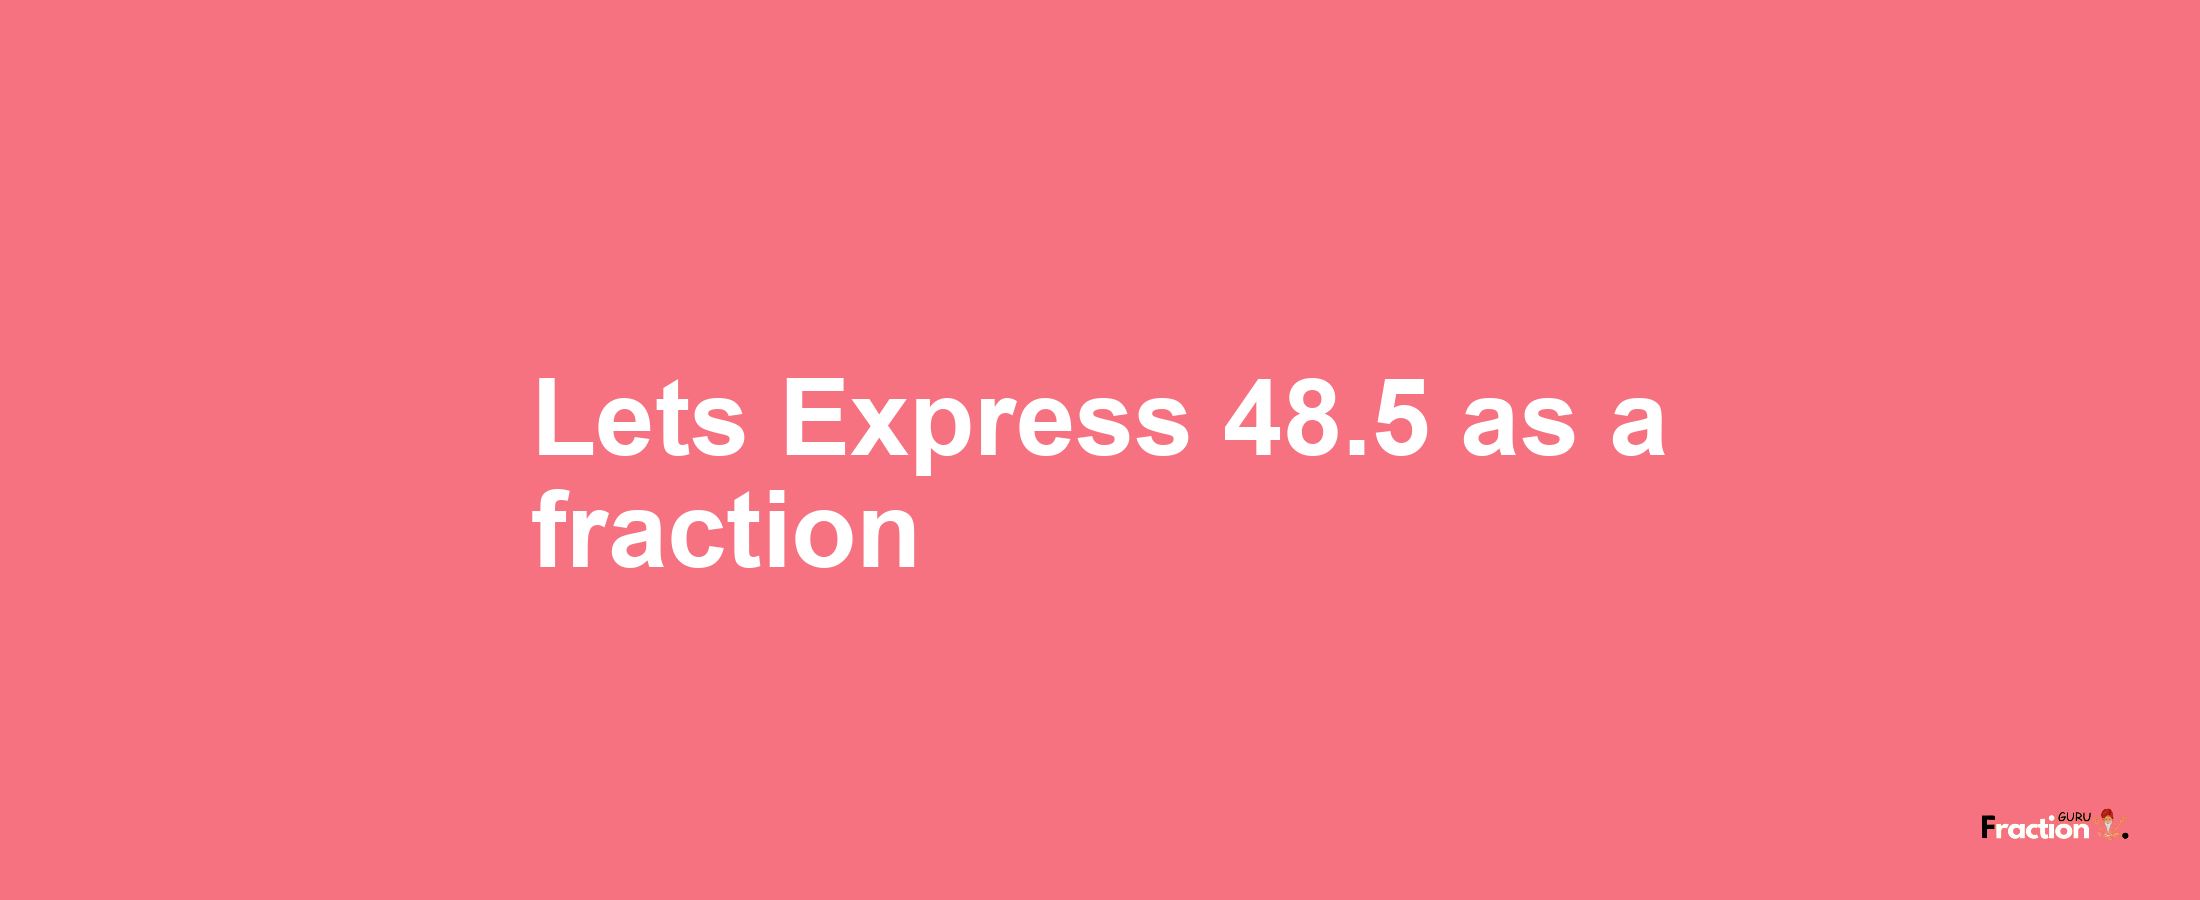 Lets Express 48.5 as afraction